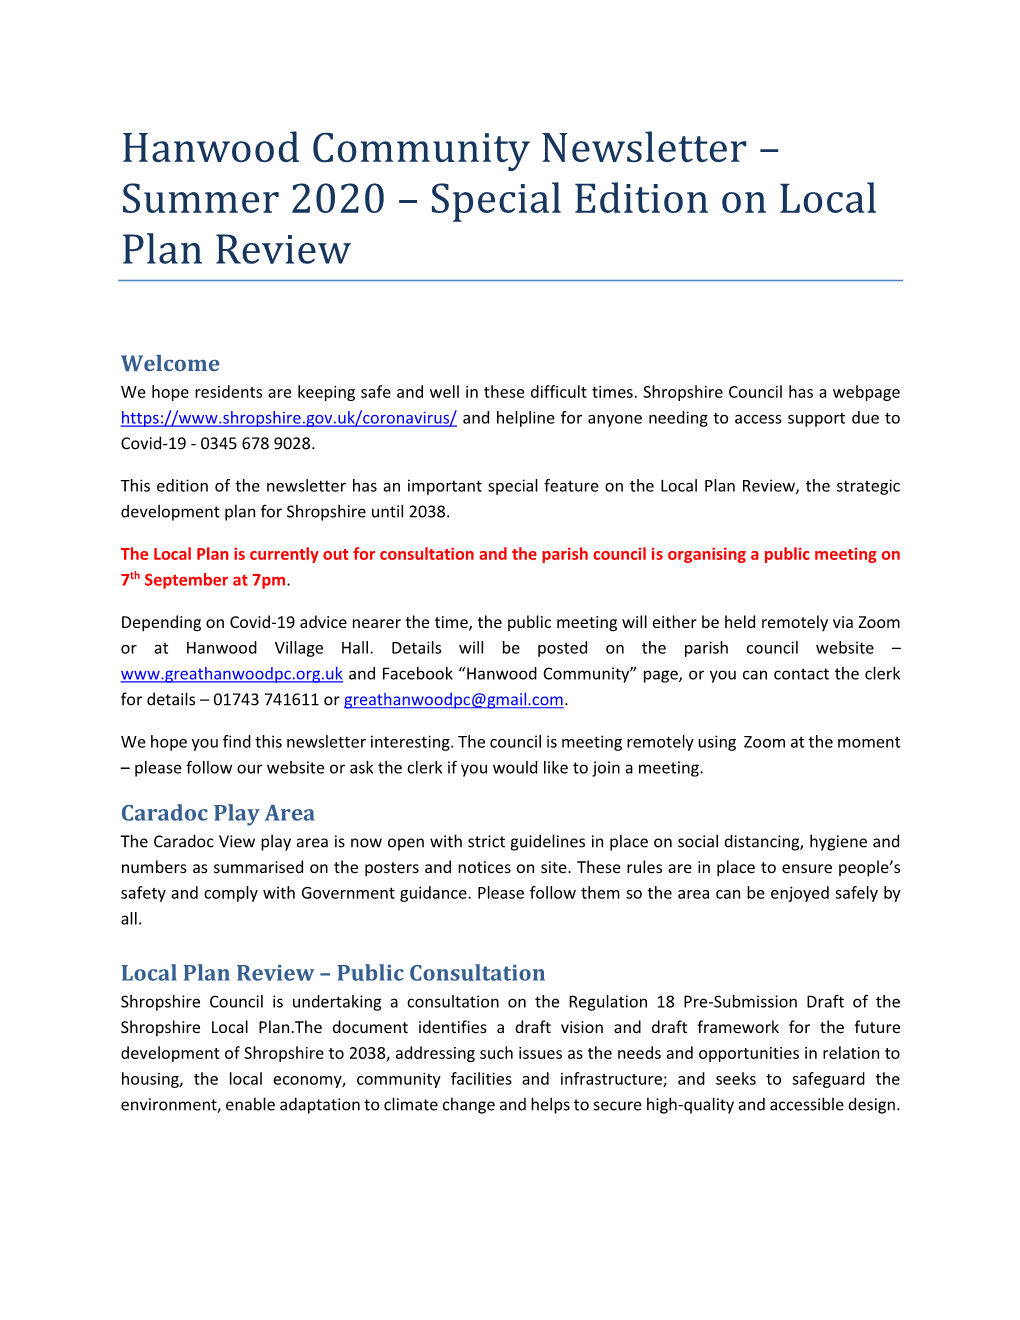 Hanwood Community Newsletter – Summer 2020 – Special Edition on Local Plan Review